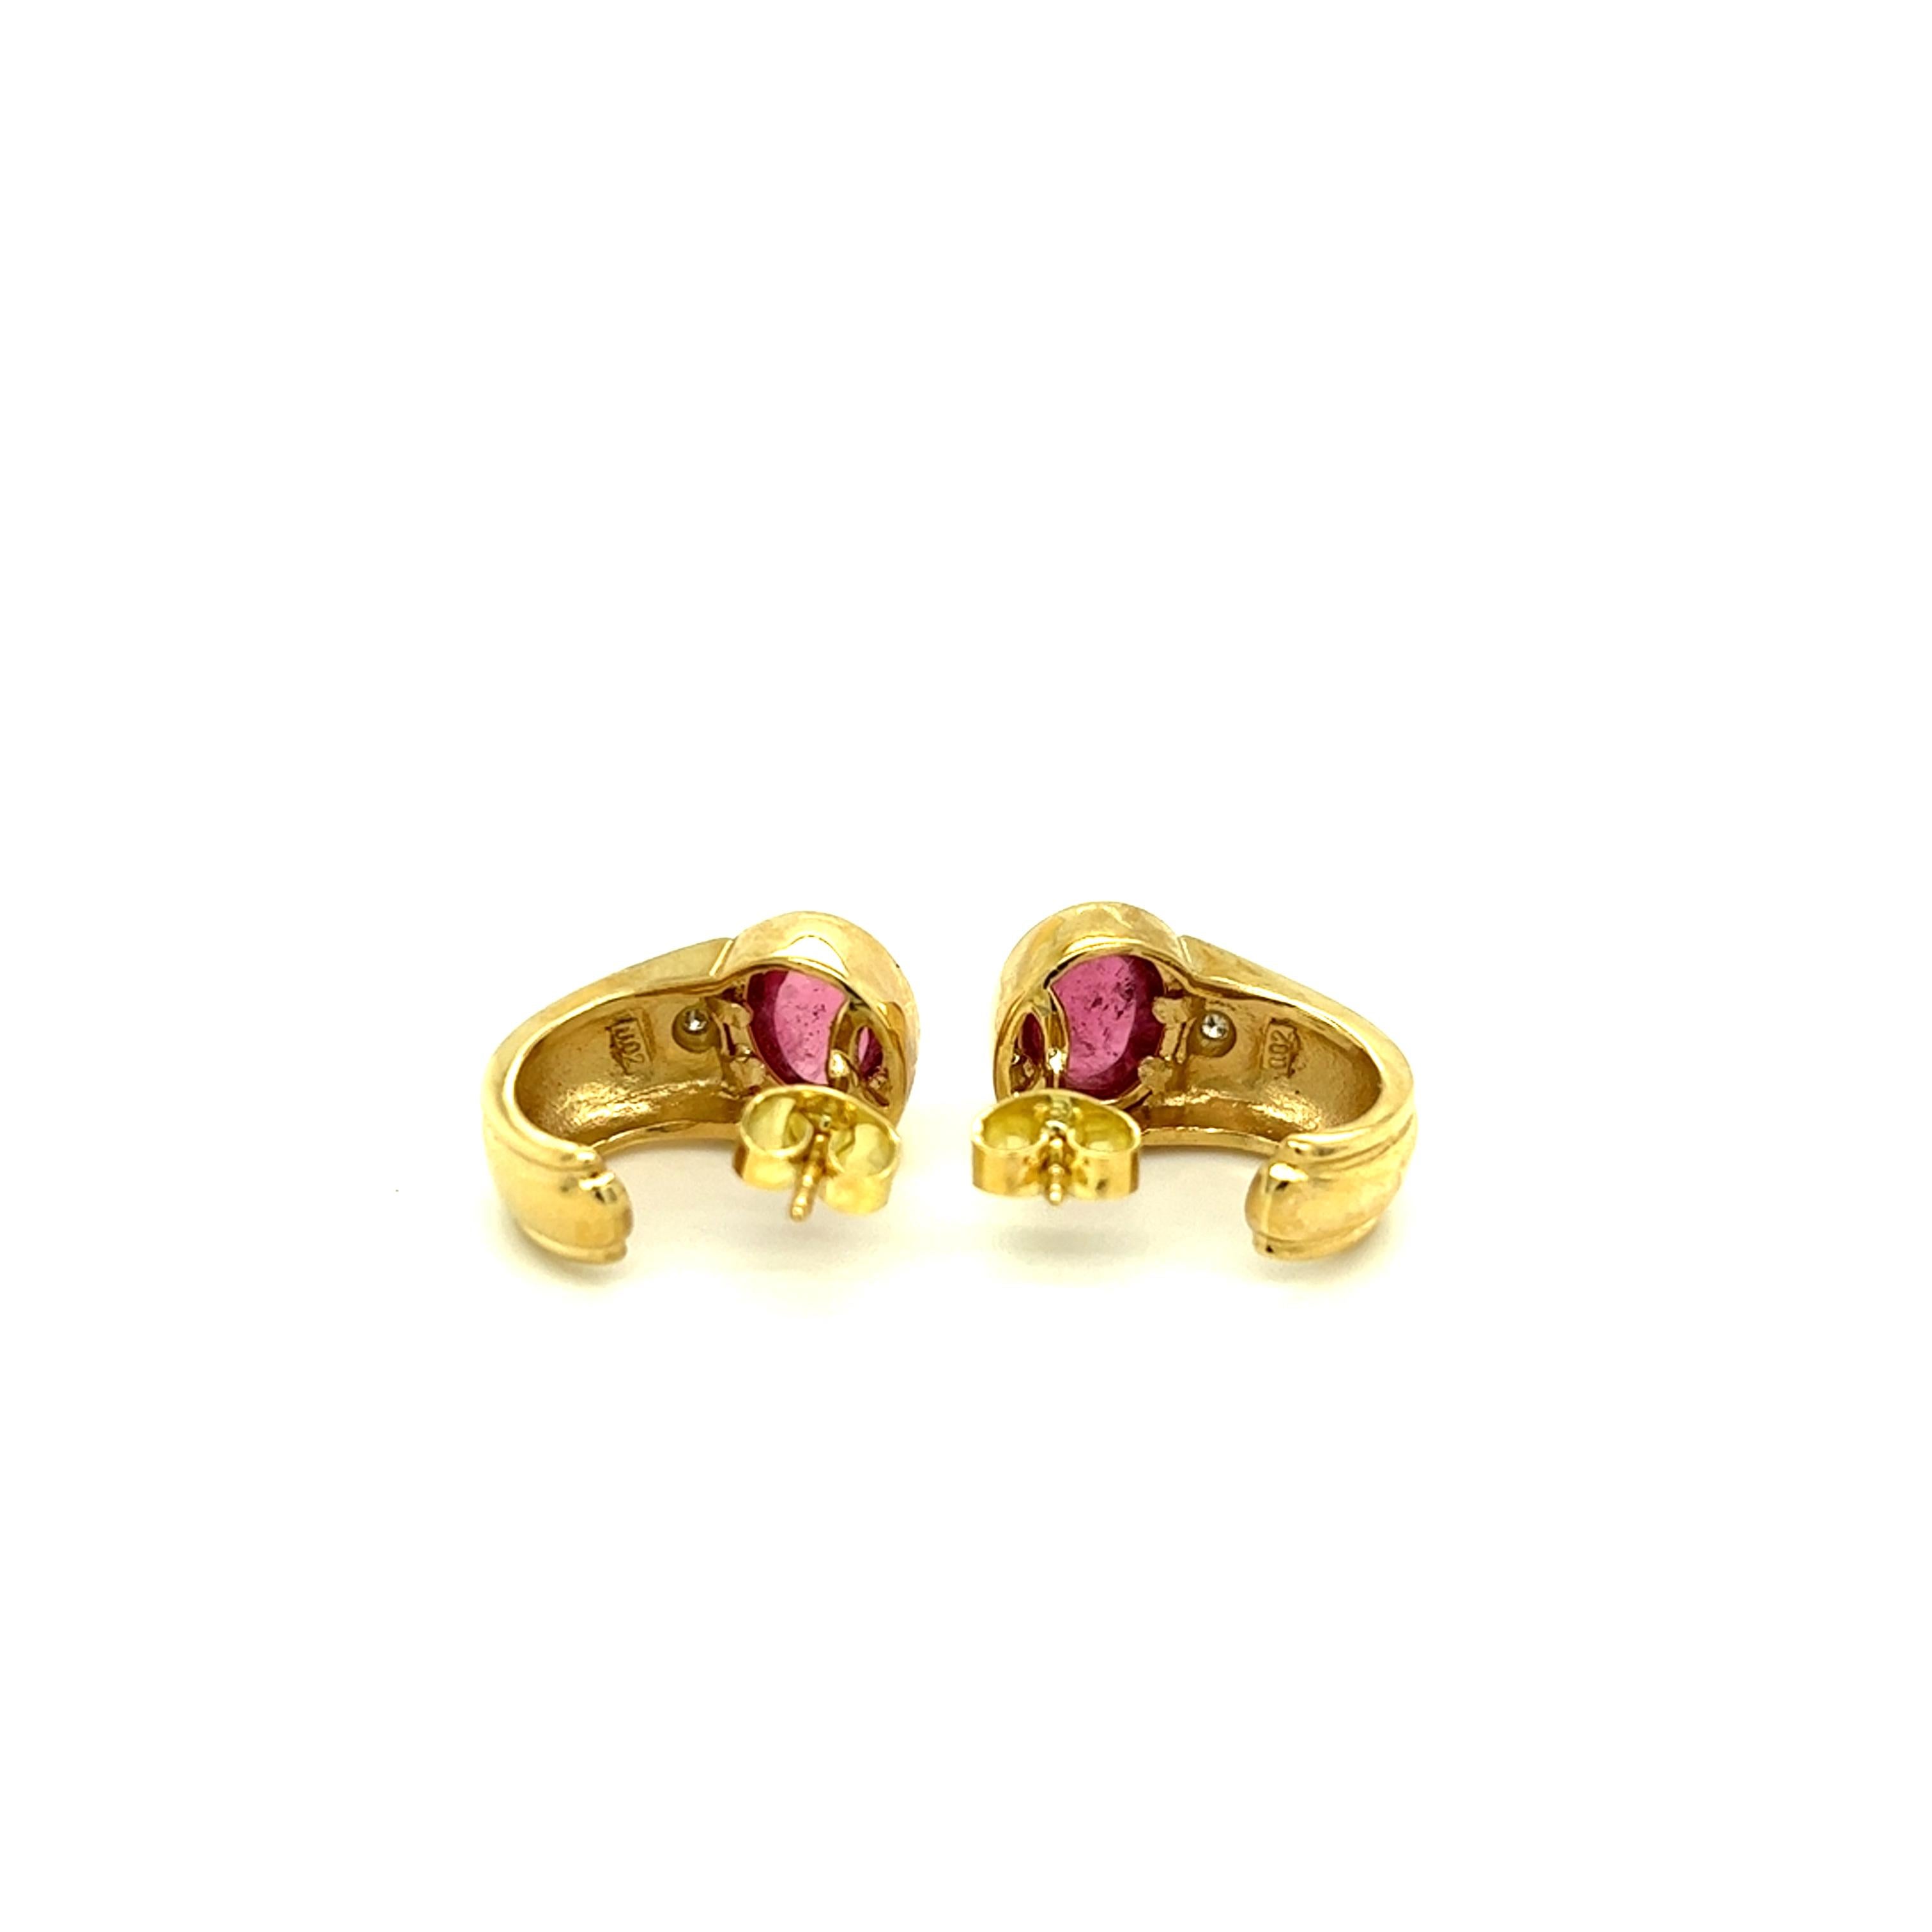 One pair of 18 karat yellow gold earrings, designed by H. Stern, (stamped 002 750) each set with one 8.5x6mm oval cabochon pink tourmaline and one round brilliant cut diamond, approximately 0.06-carat total weight with matching G/H color and VS